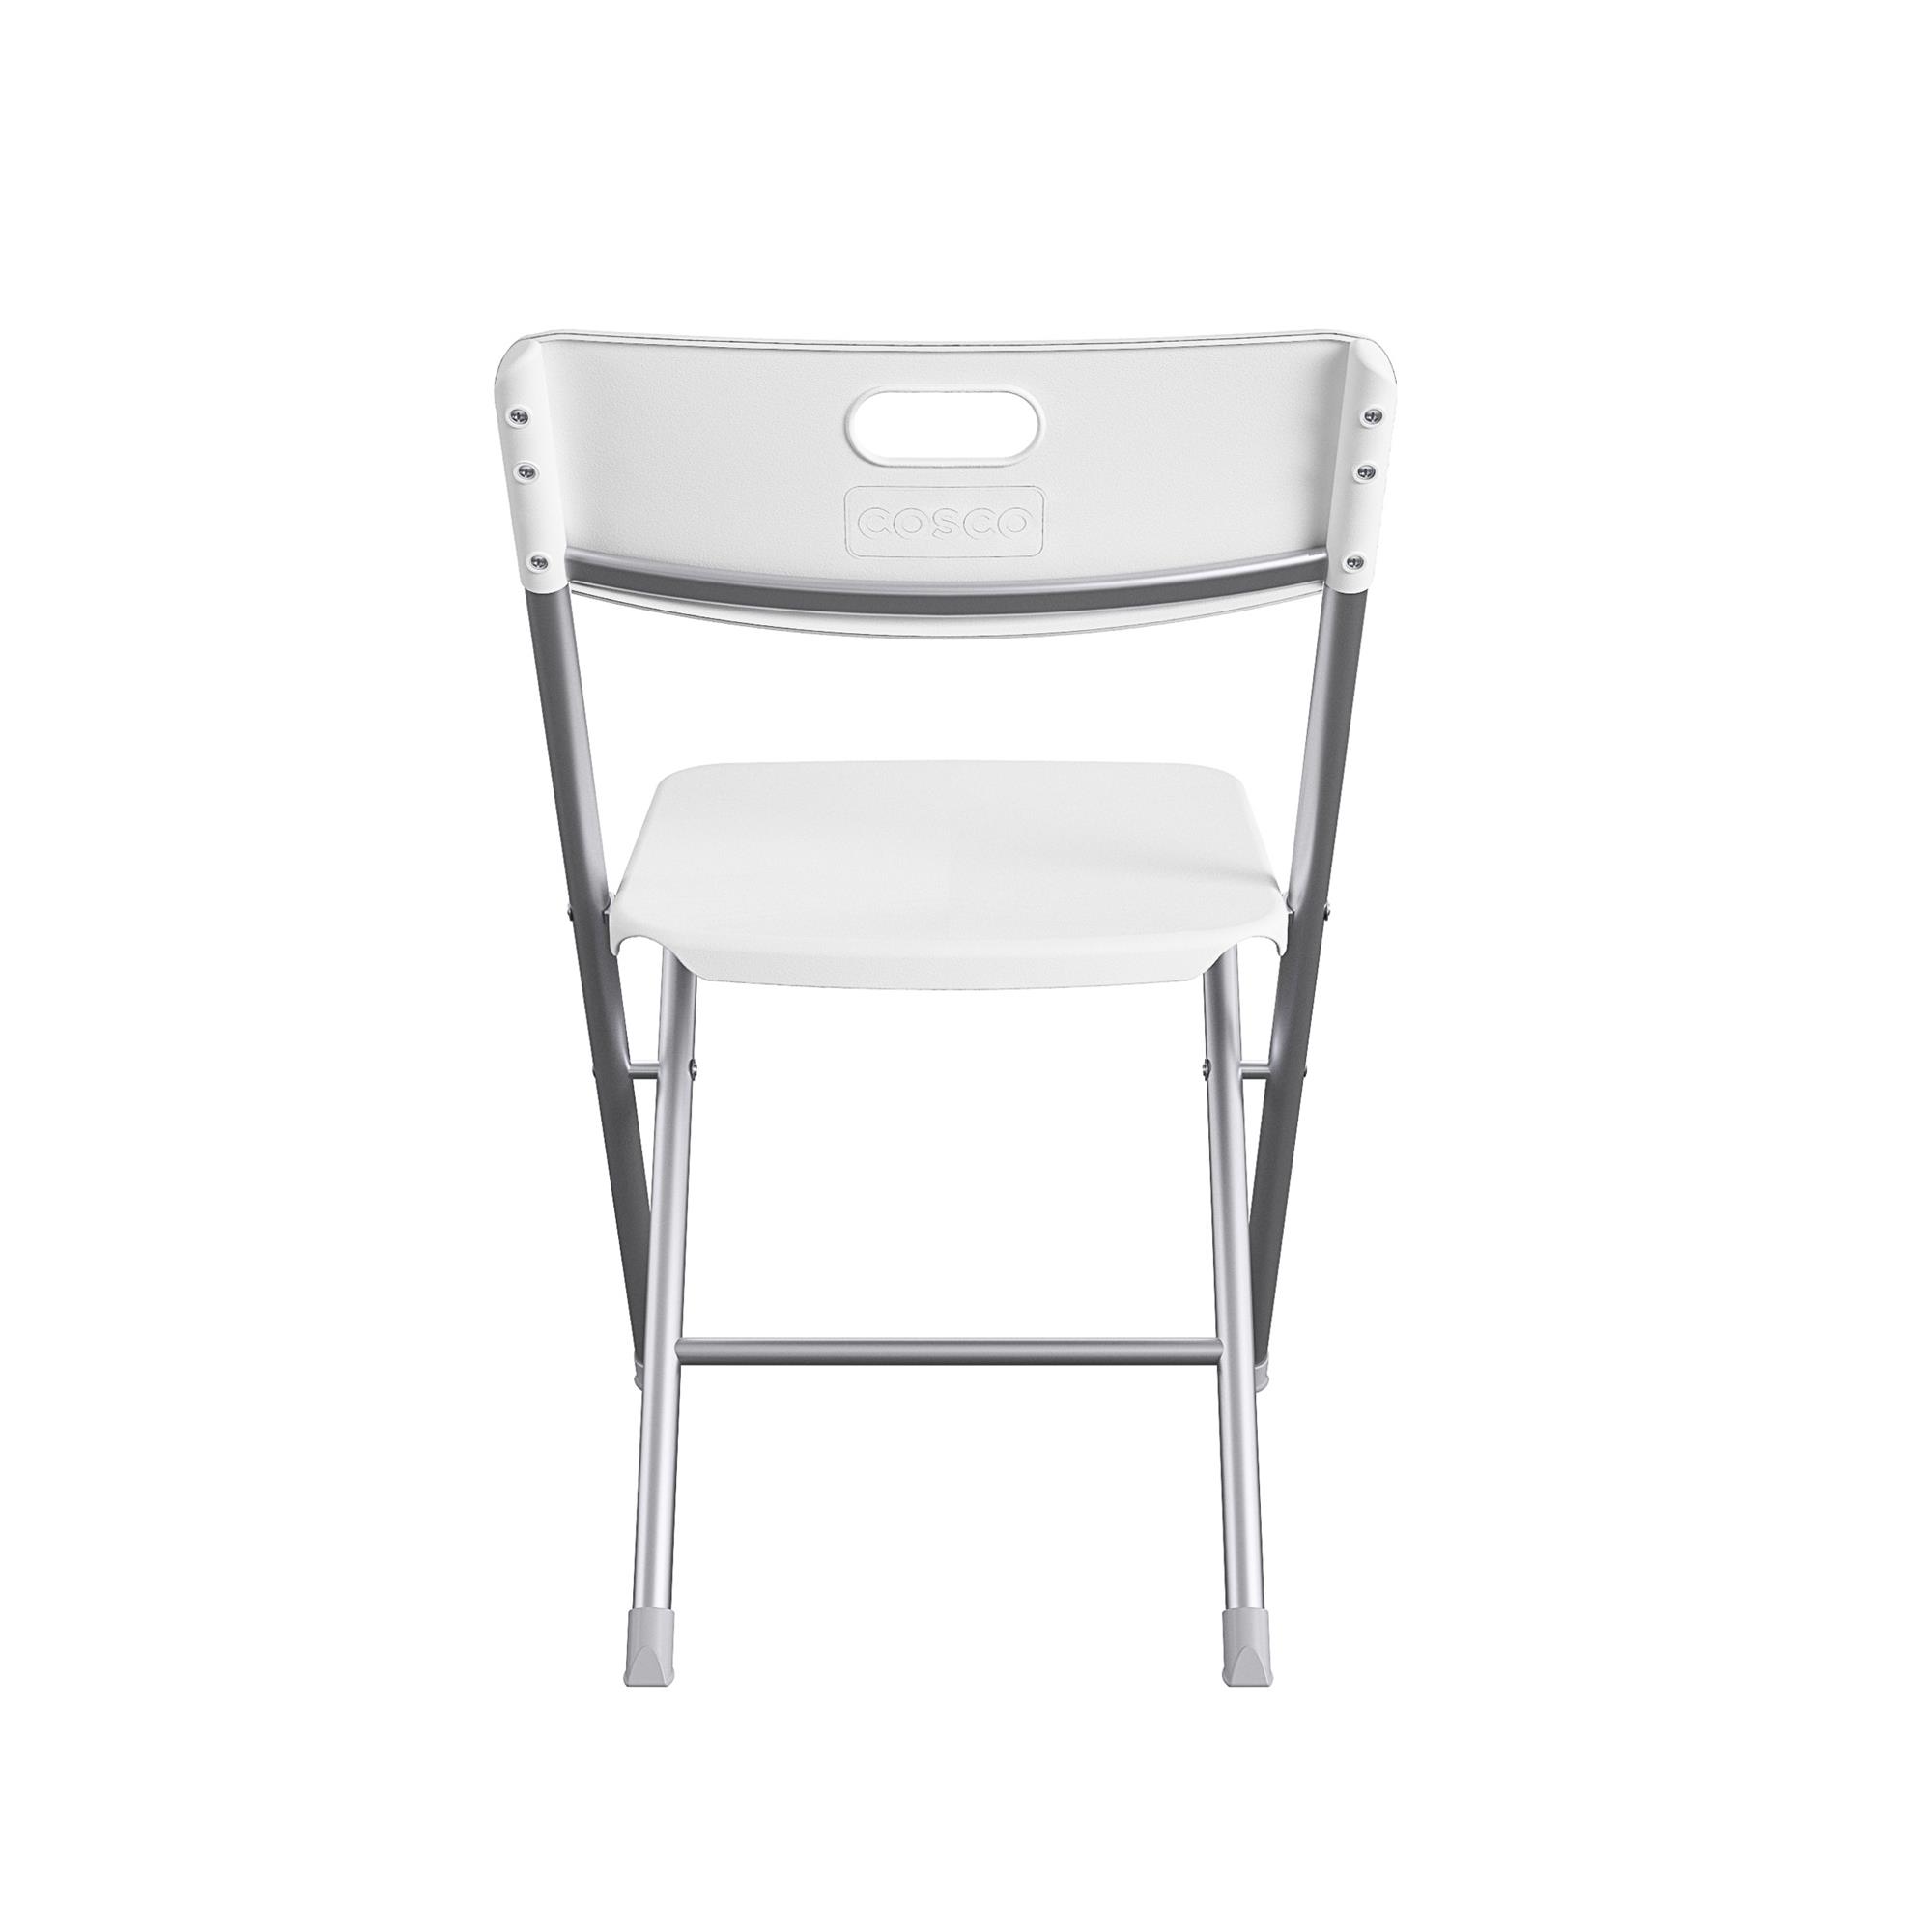 Mainstays Resin Seat & Back Folding Chair, White - image 4 of 7